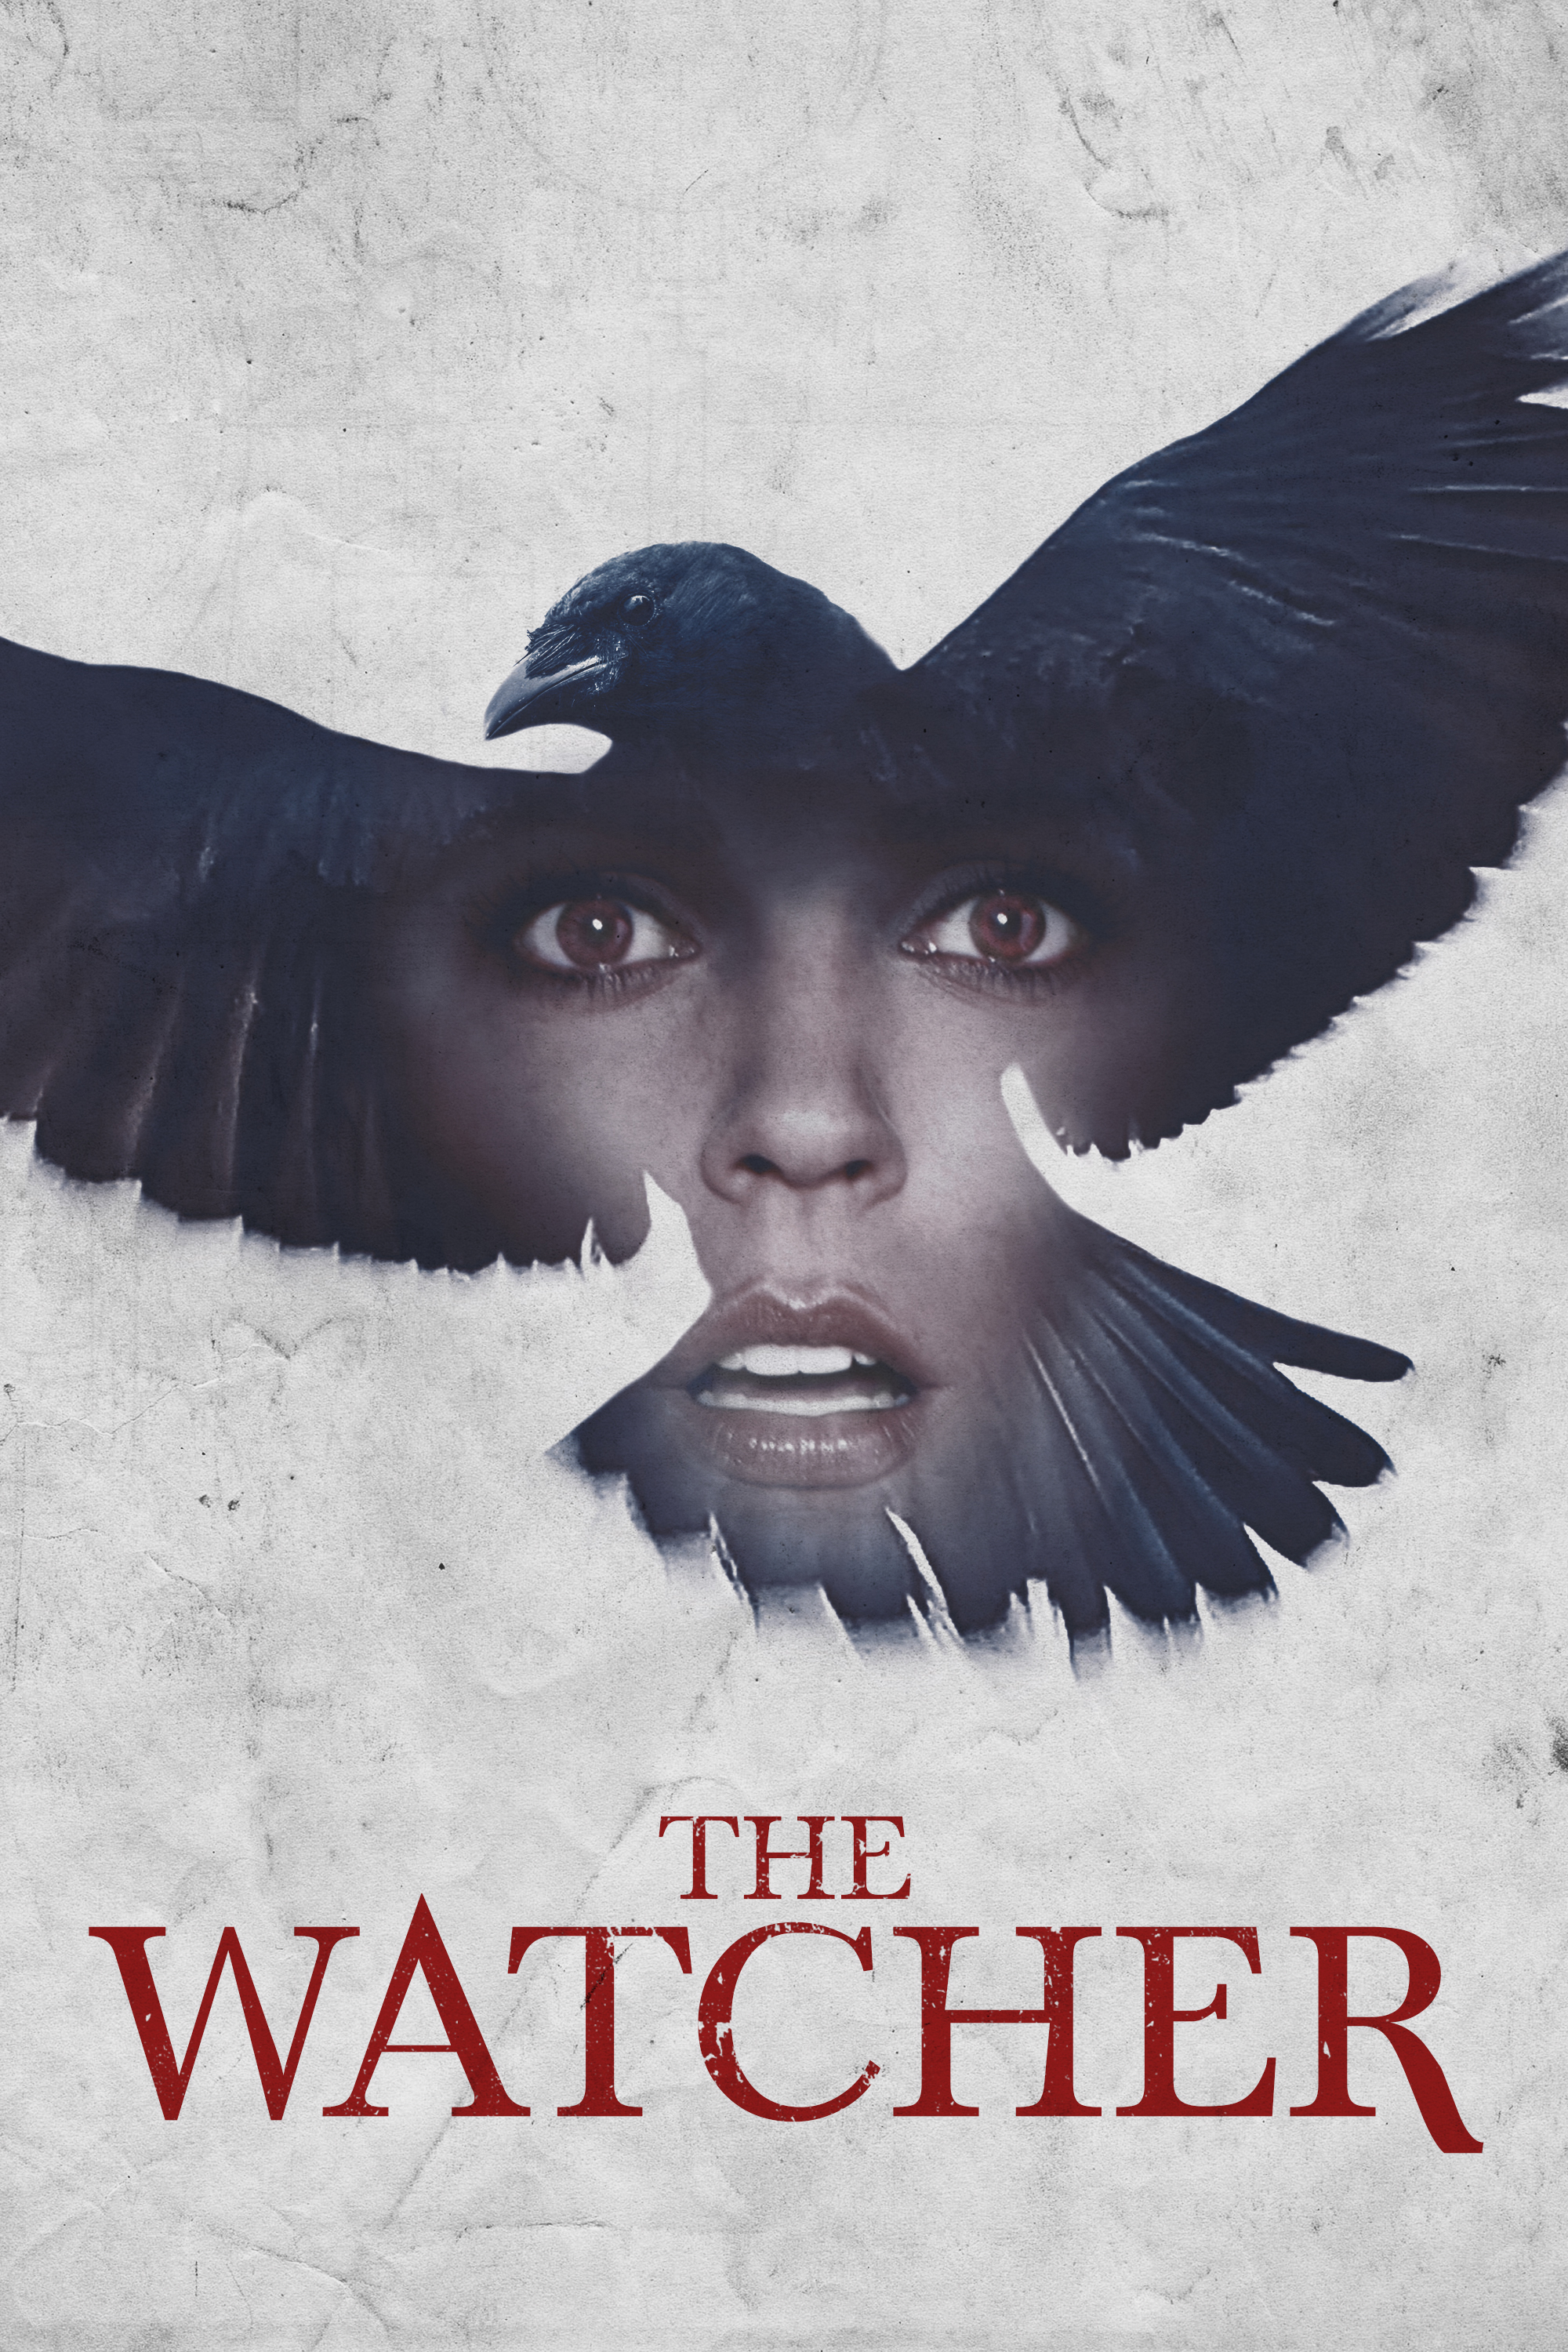 The Watcher - Full Cast & Crew - TV Guide